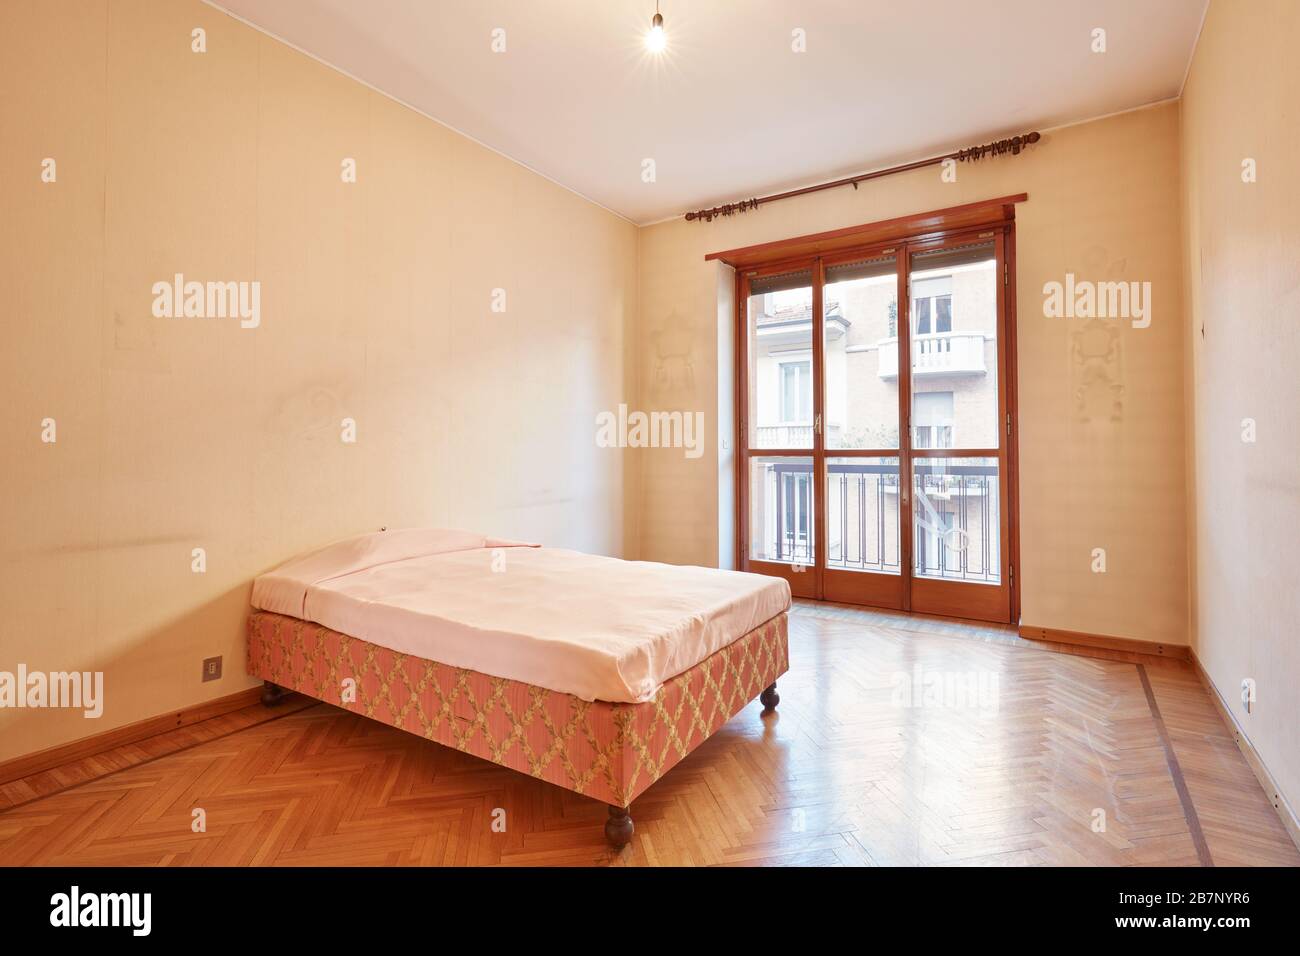 Bedroom with pink bed cover in old apartment interior Stock Photo